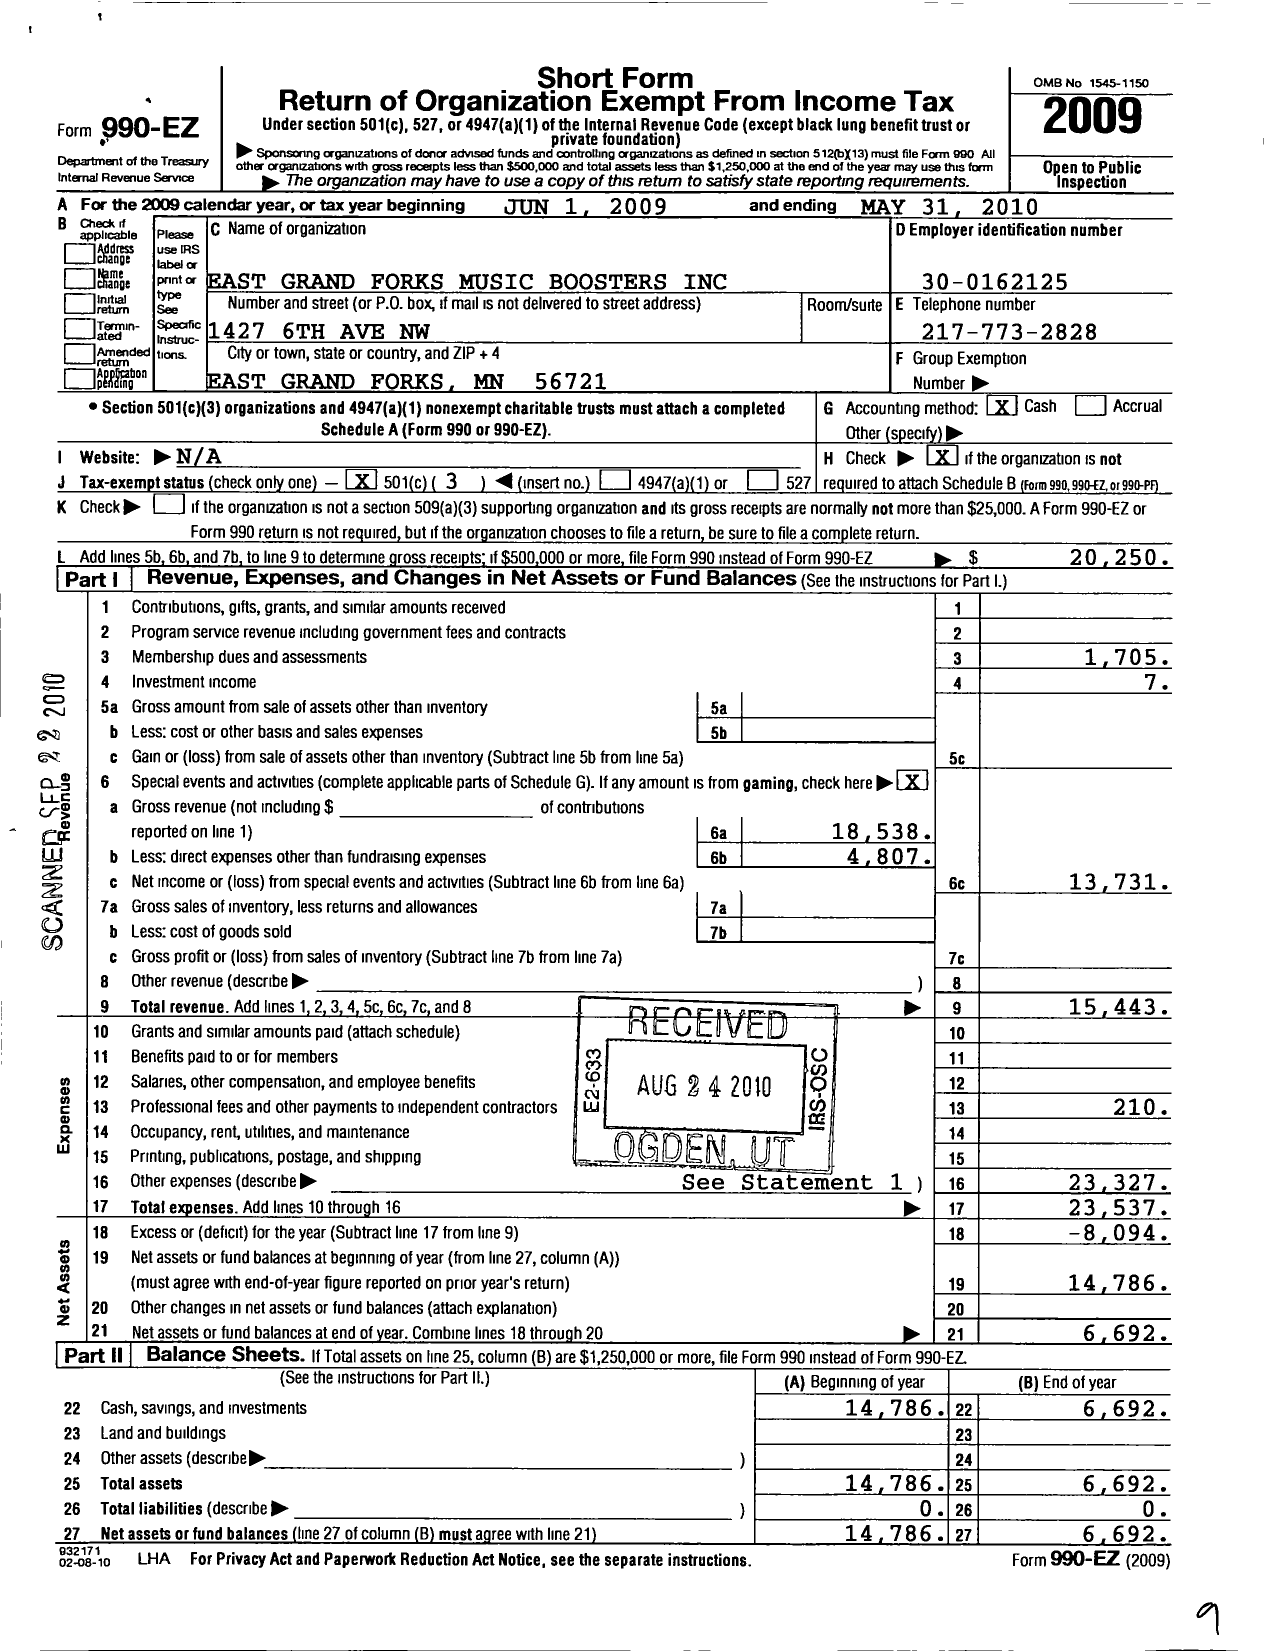 Image of first page of 2009 Form 990EZ for East Grand Forks Music Boosters